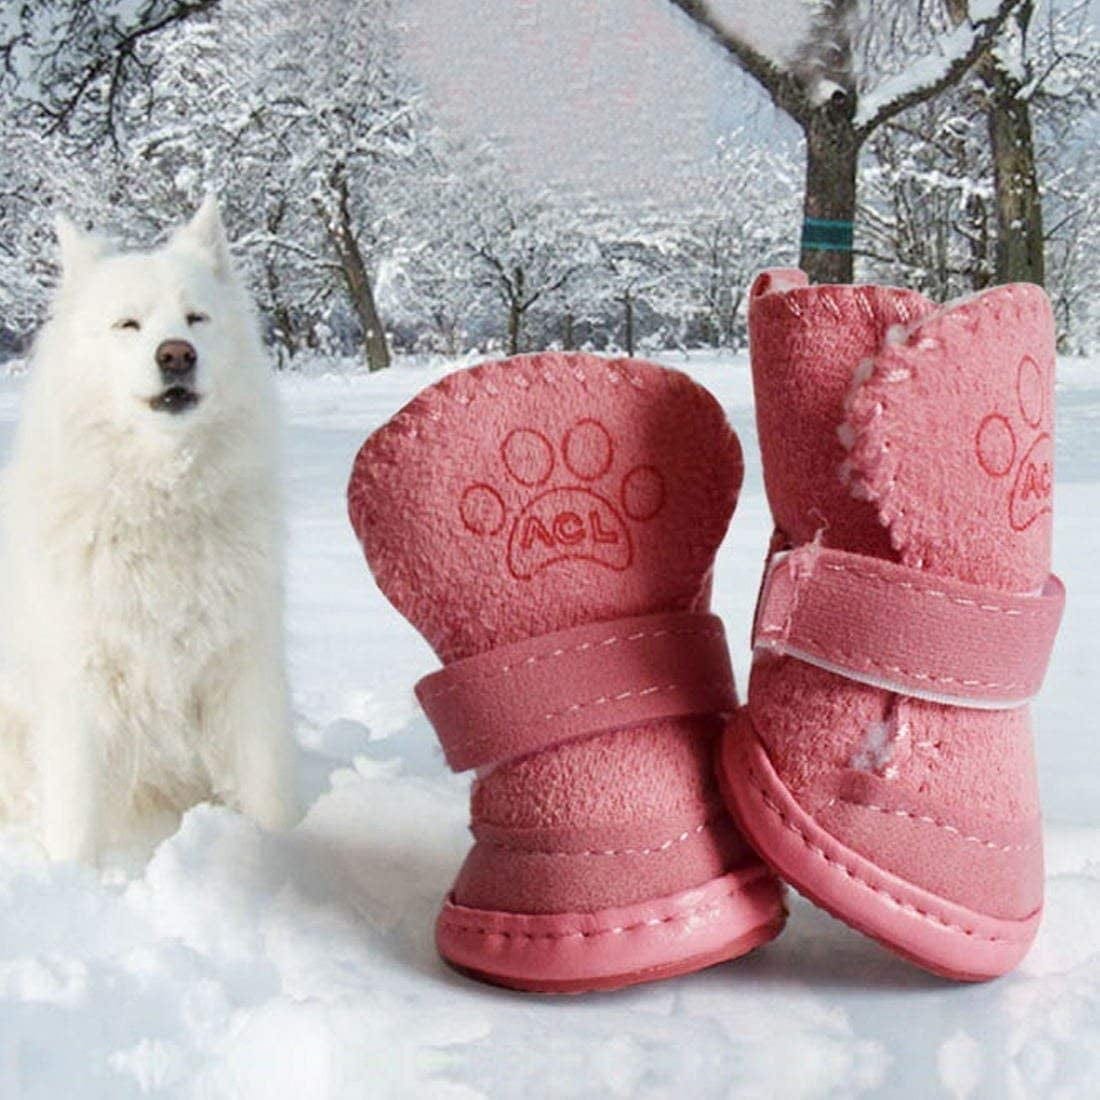 Dog Boots Paw Protector, Anti-Slip Dog Shoes,Dog Australia Boots Pet Antiskid Shoes Winter Warm Skidproof Sneakers, for Small Dog (#3, Pink)